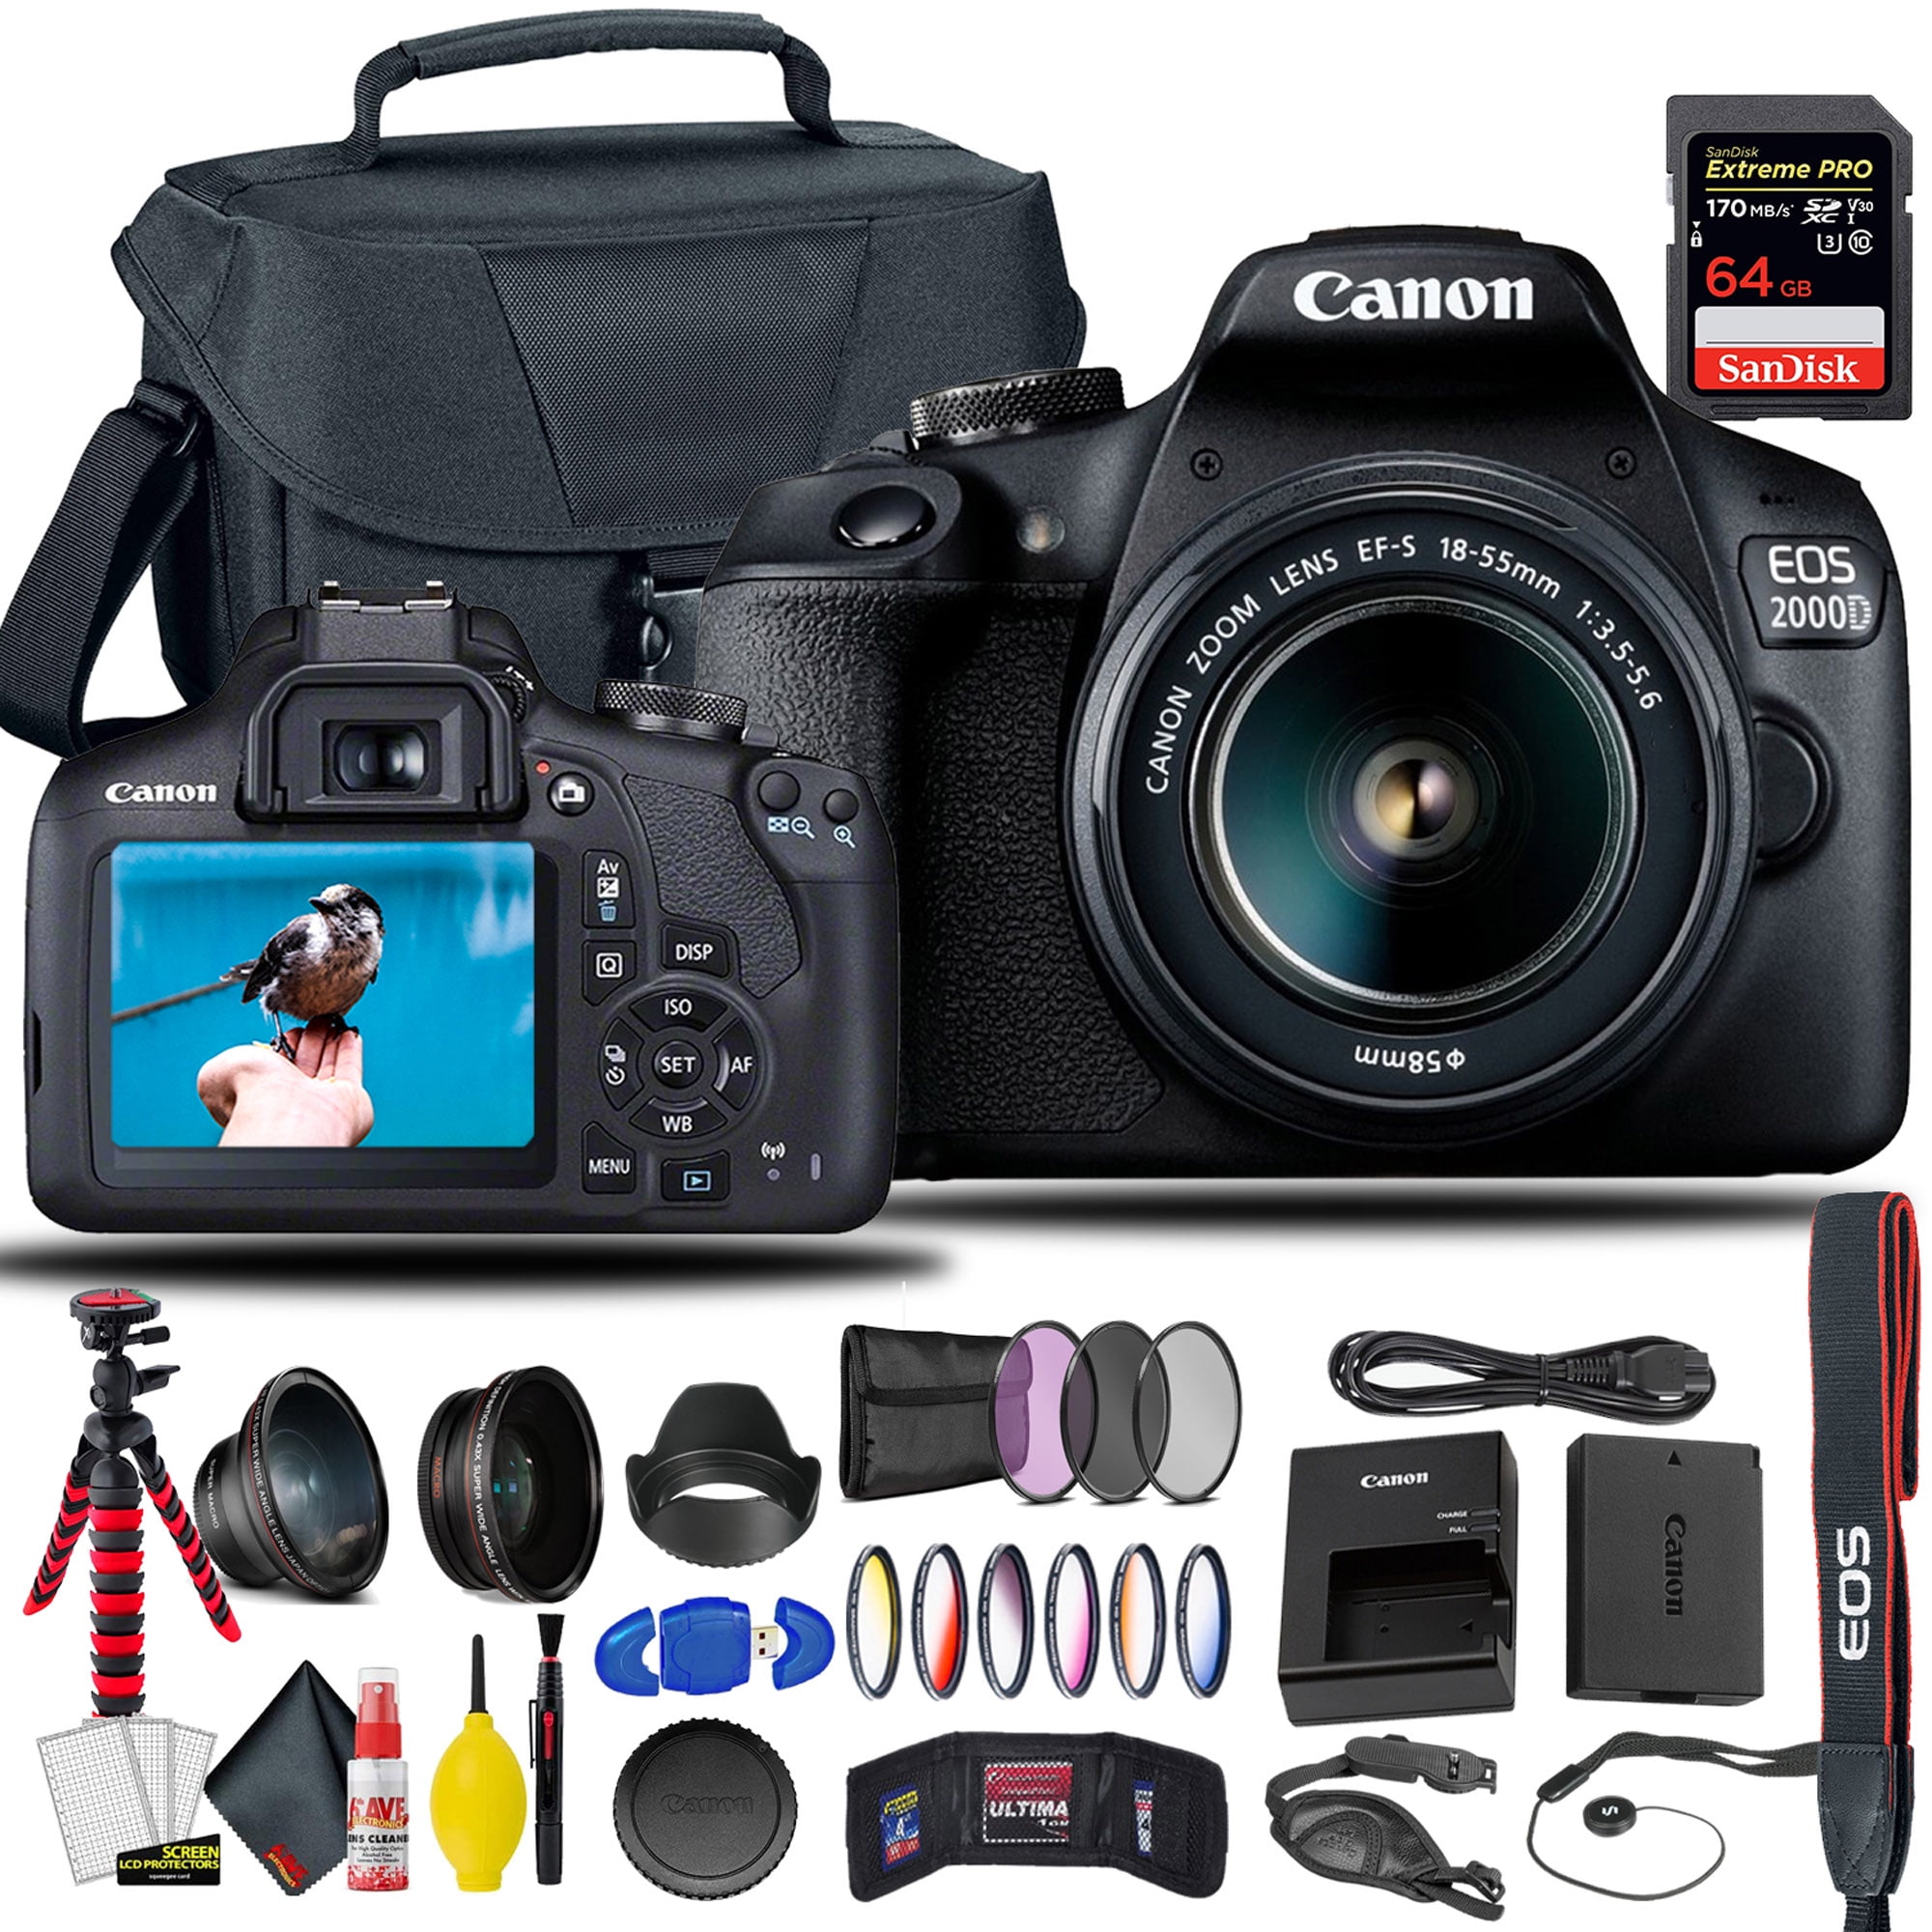 Canon EOS Rebel T7 / 2000D Review